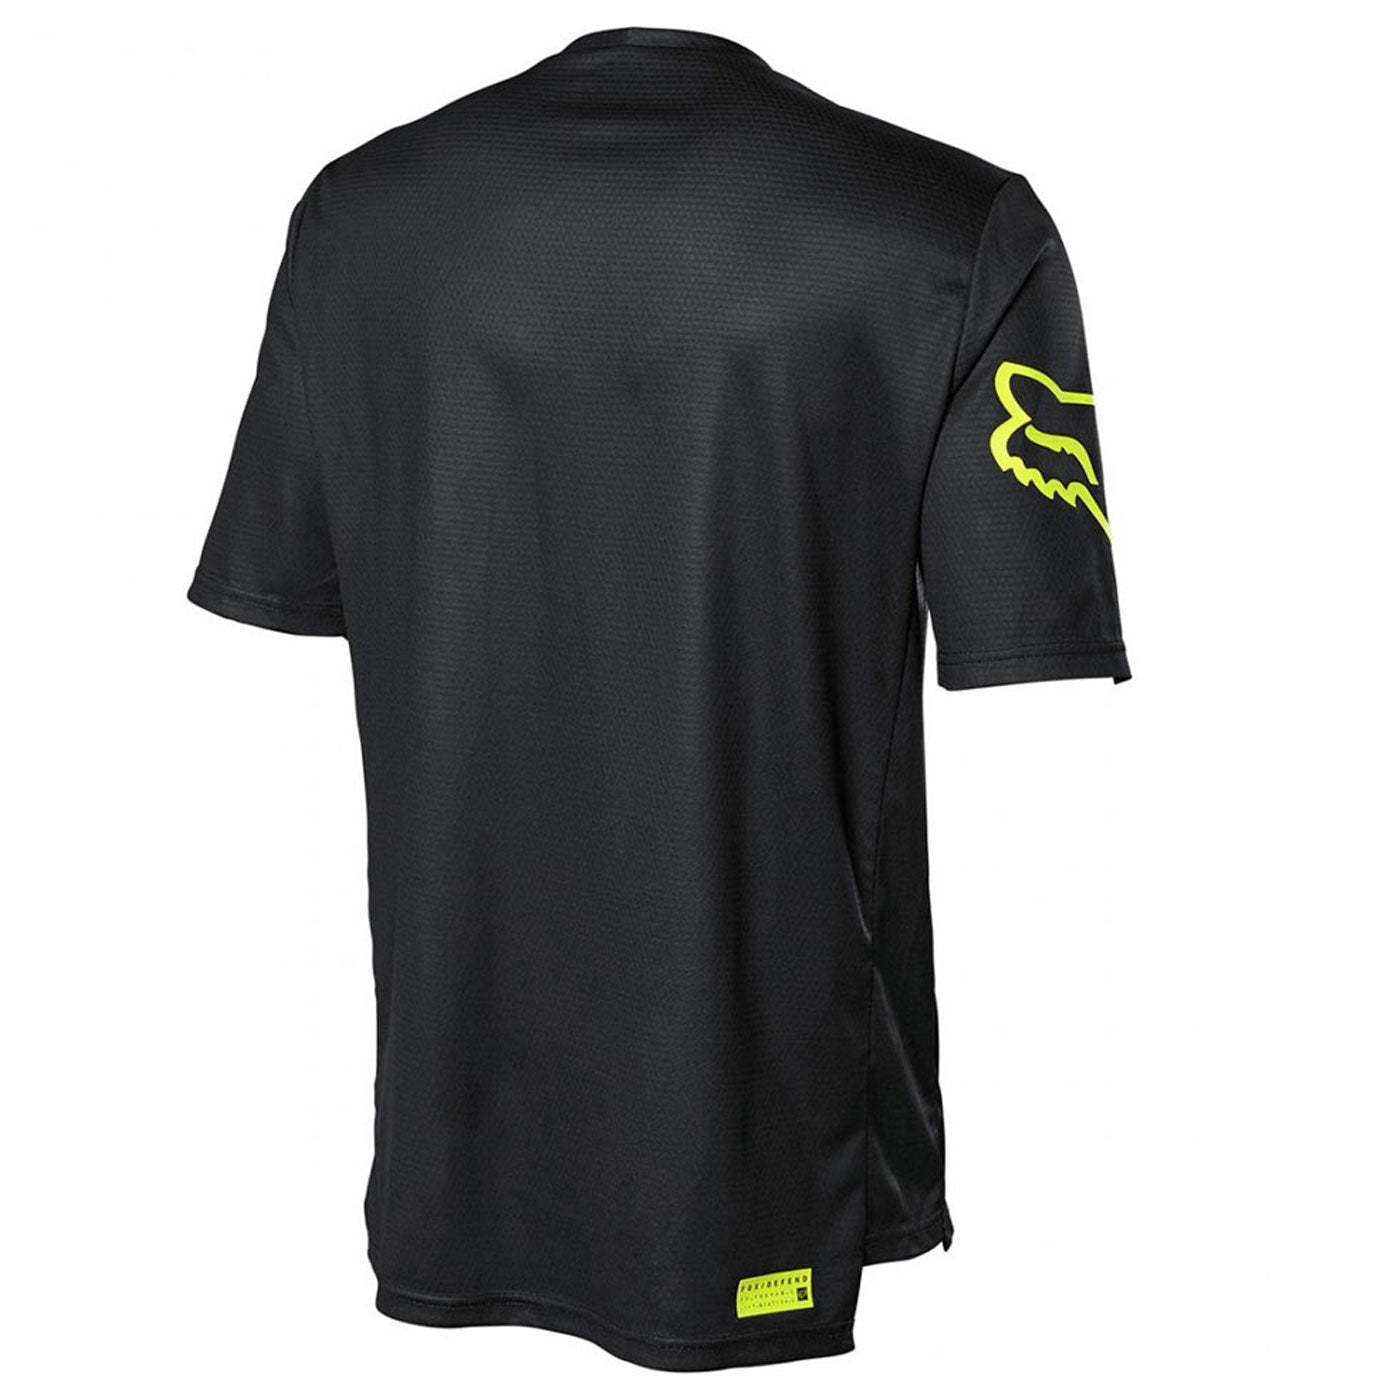 Fox Defend SG jersey - Black | All4cycling